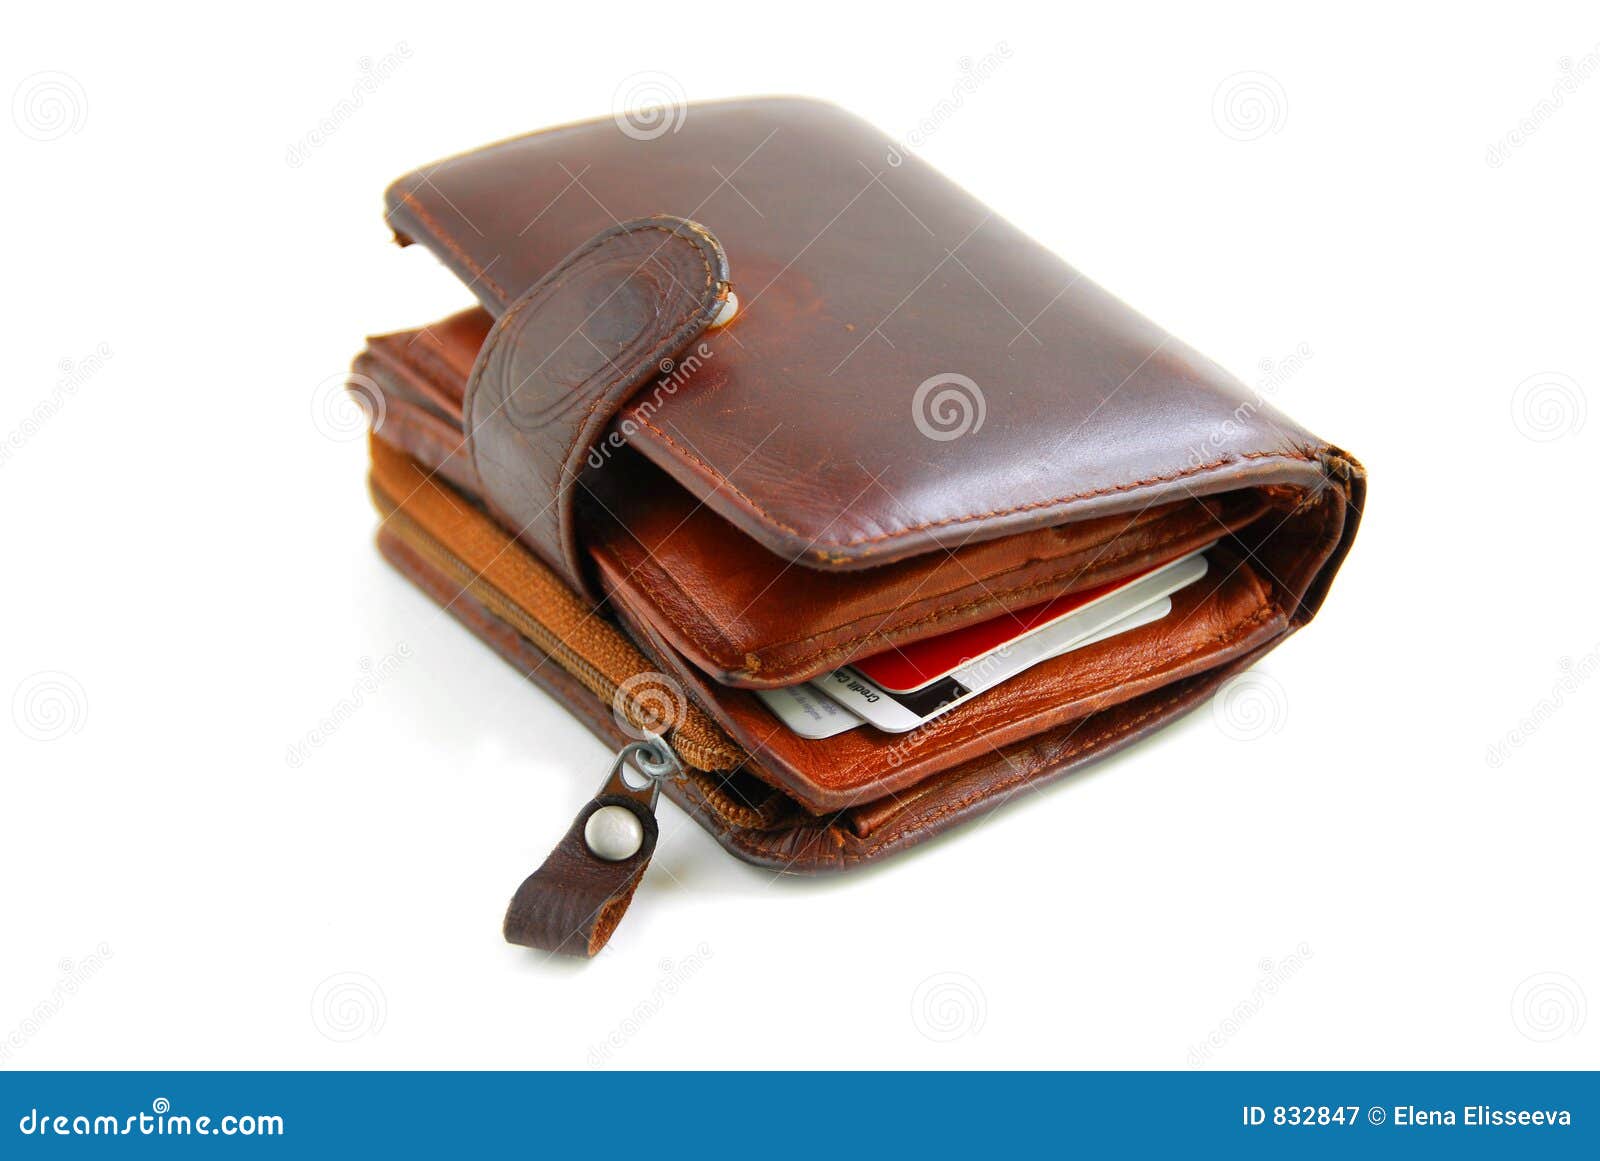 Old wallet stock image. Image of close, leather, full, banking - 832847